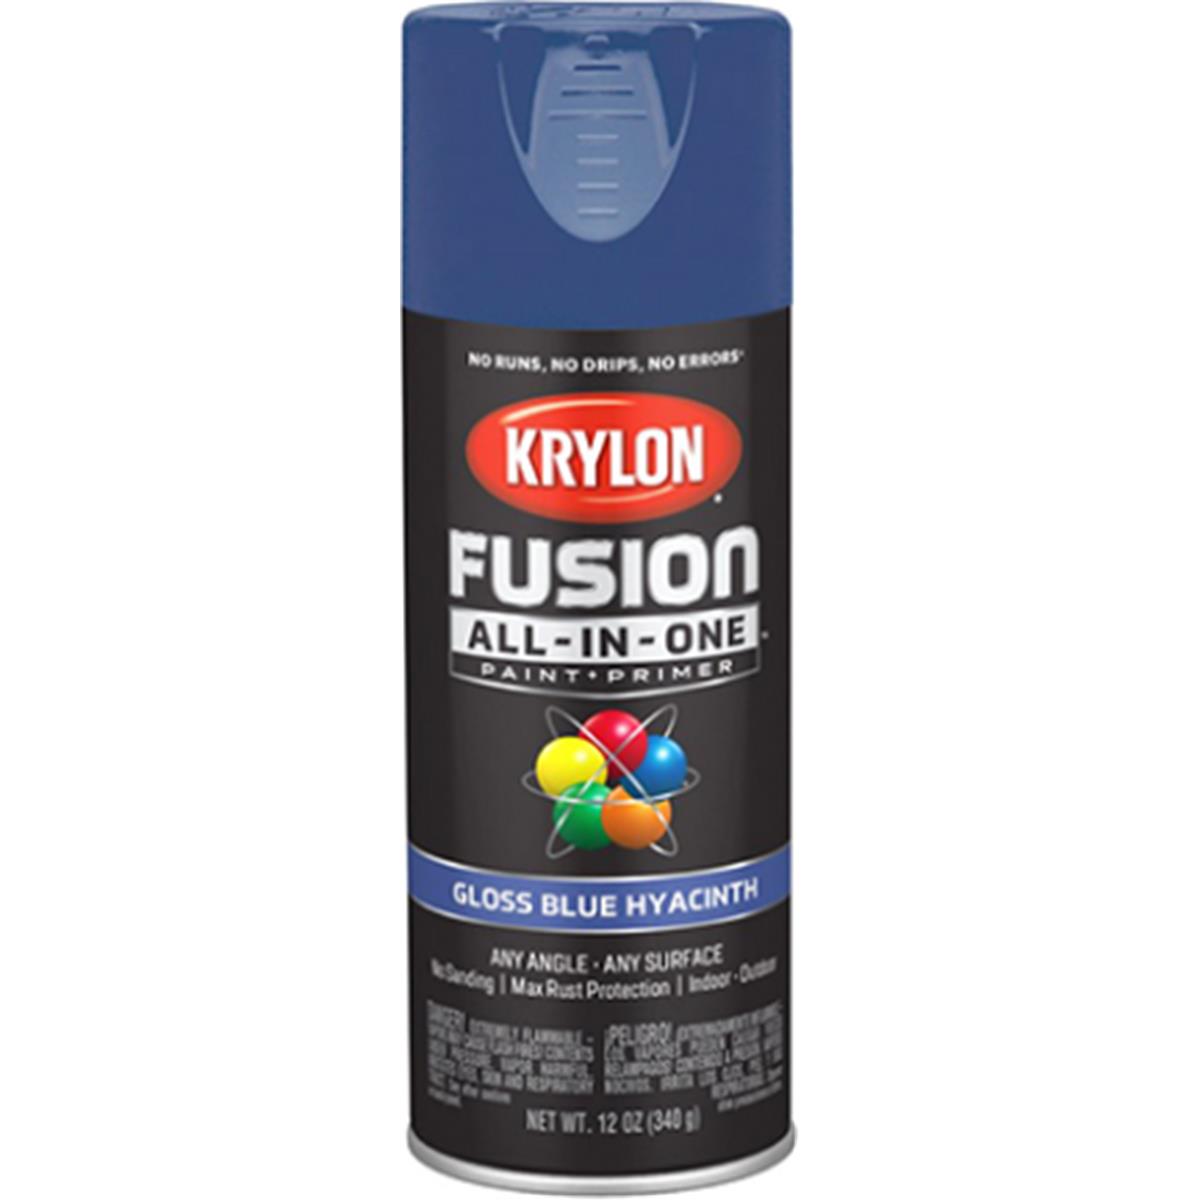 K02724007 12 Oz Fusion All-in-one Paint & Primer Spray